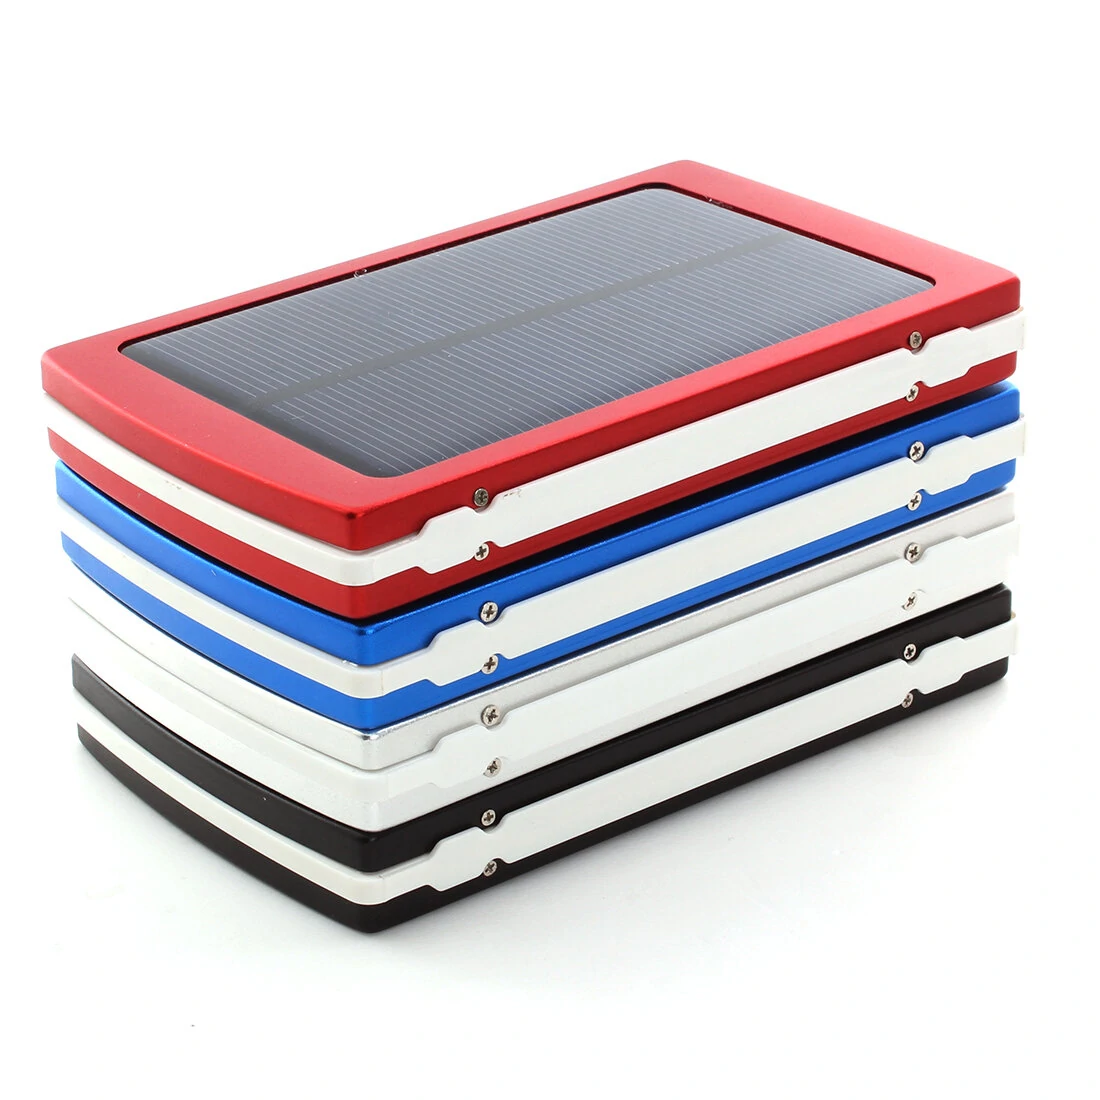 Solar Charger Mobile Phone Cell Phone Power Bank Charger for Camping Hiking Travel